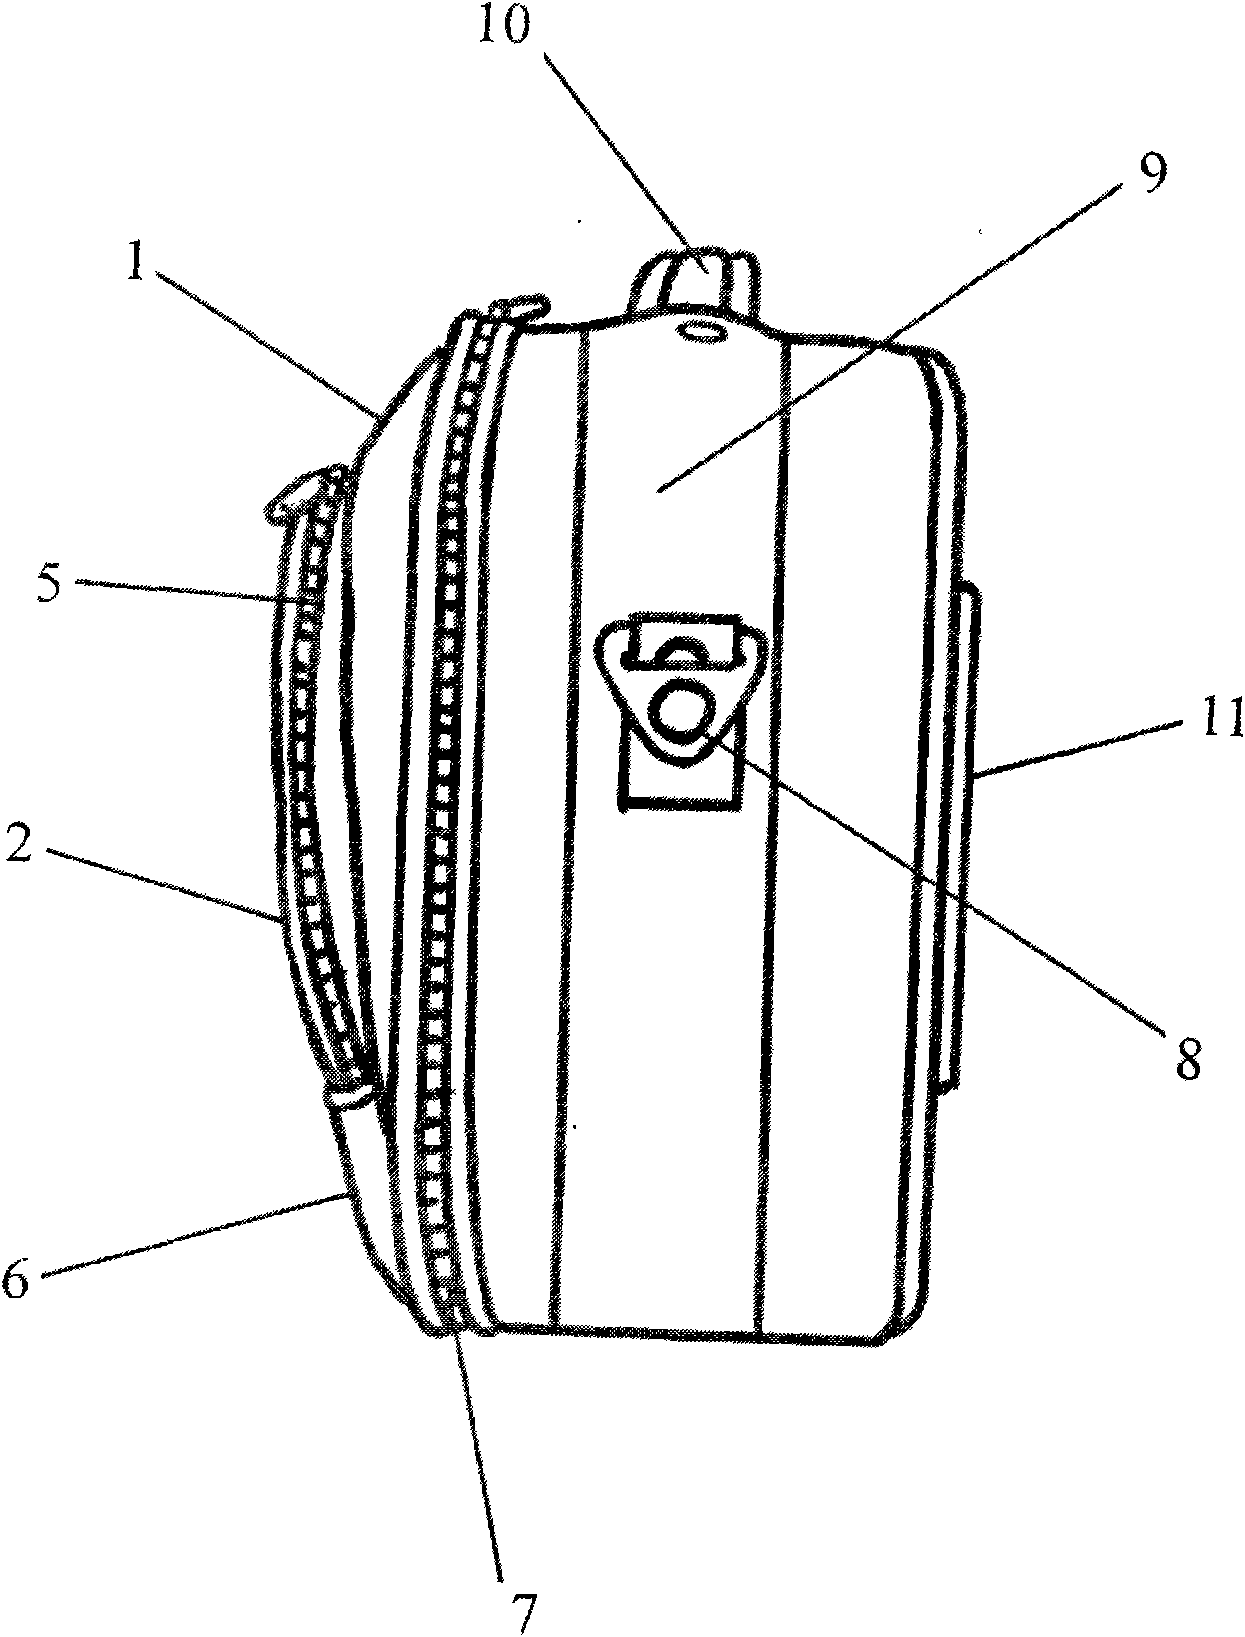 Hand bag with suspender loop and casing tape